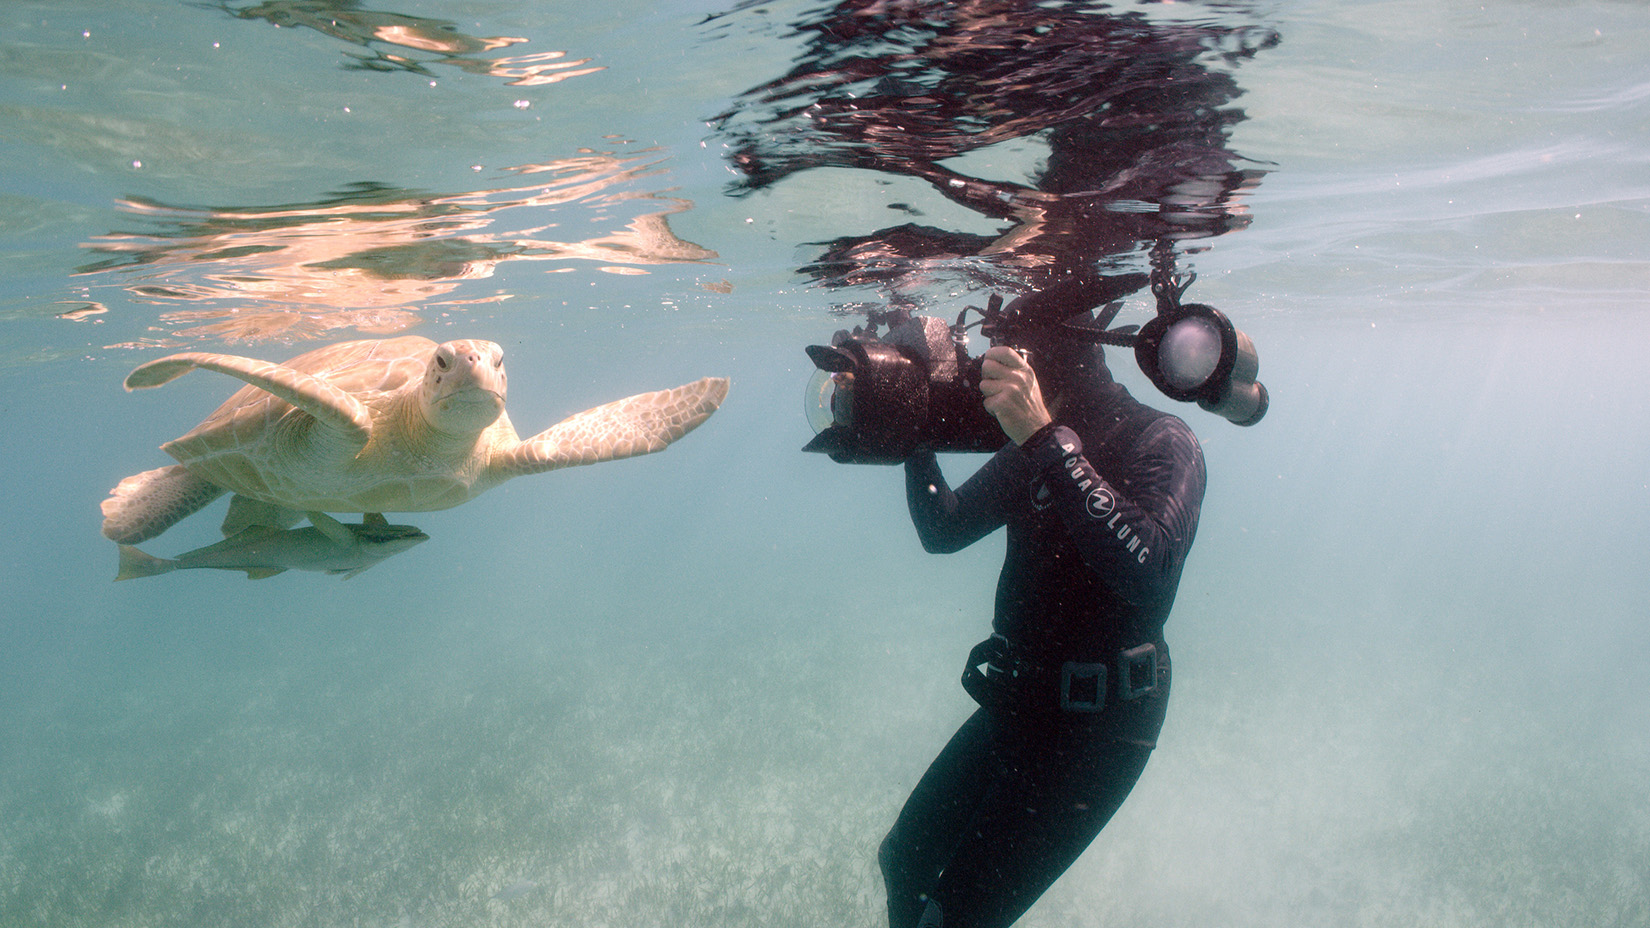 Cristina Mittermeier photographs a Sea Turtle casually swimming by.